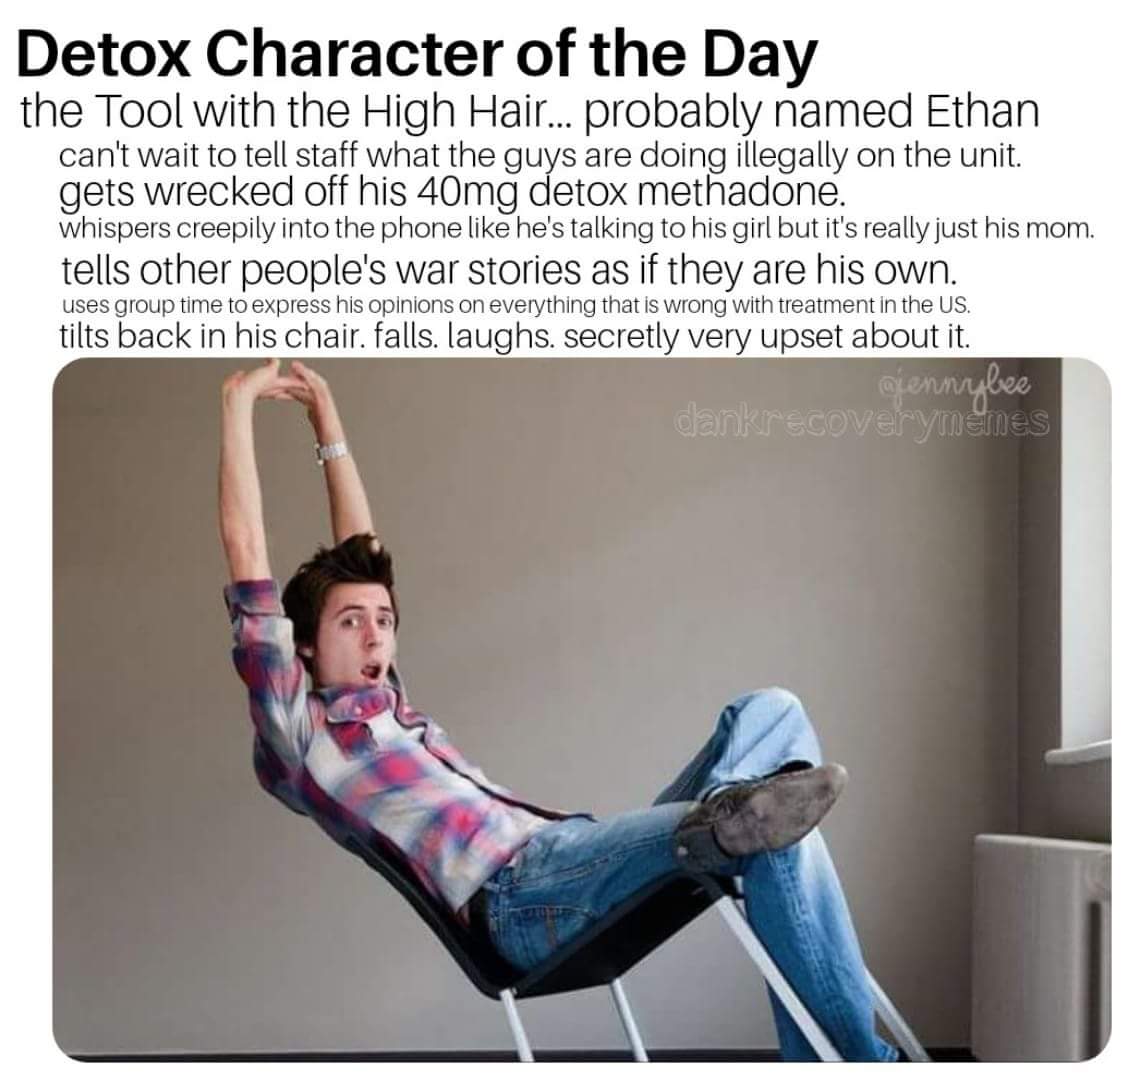 detox character of the day - Detox Character of the Day the Tool with the High Hair... probably named Ethan can't wait to tell staff what the guys are doing illegally on the unit. gets wrecked off his 40mg detox methadone. whispers creepily into the phone